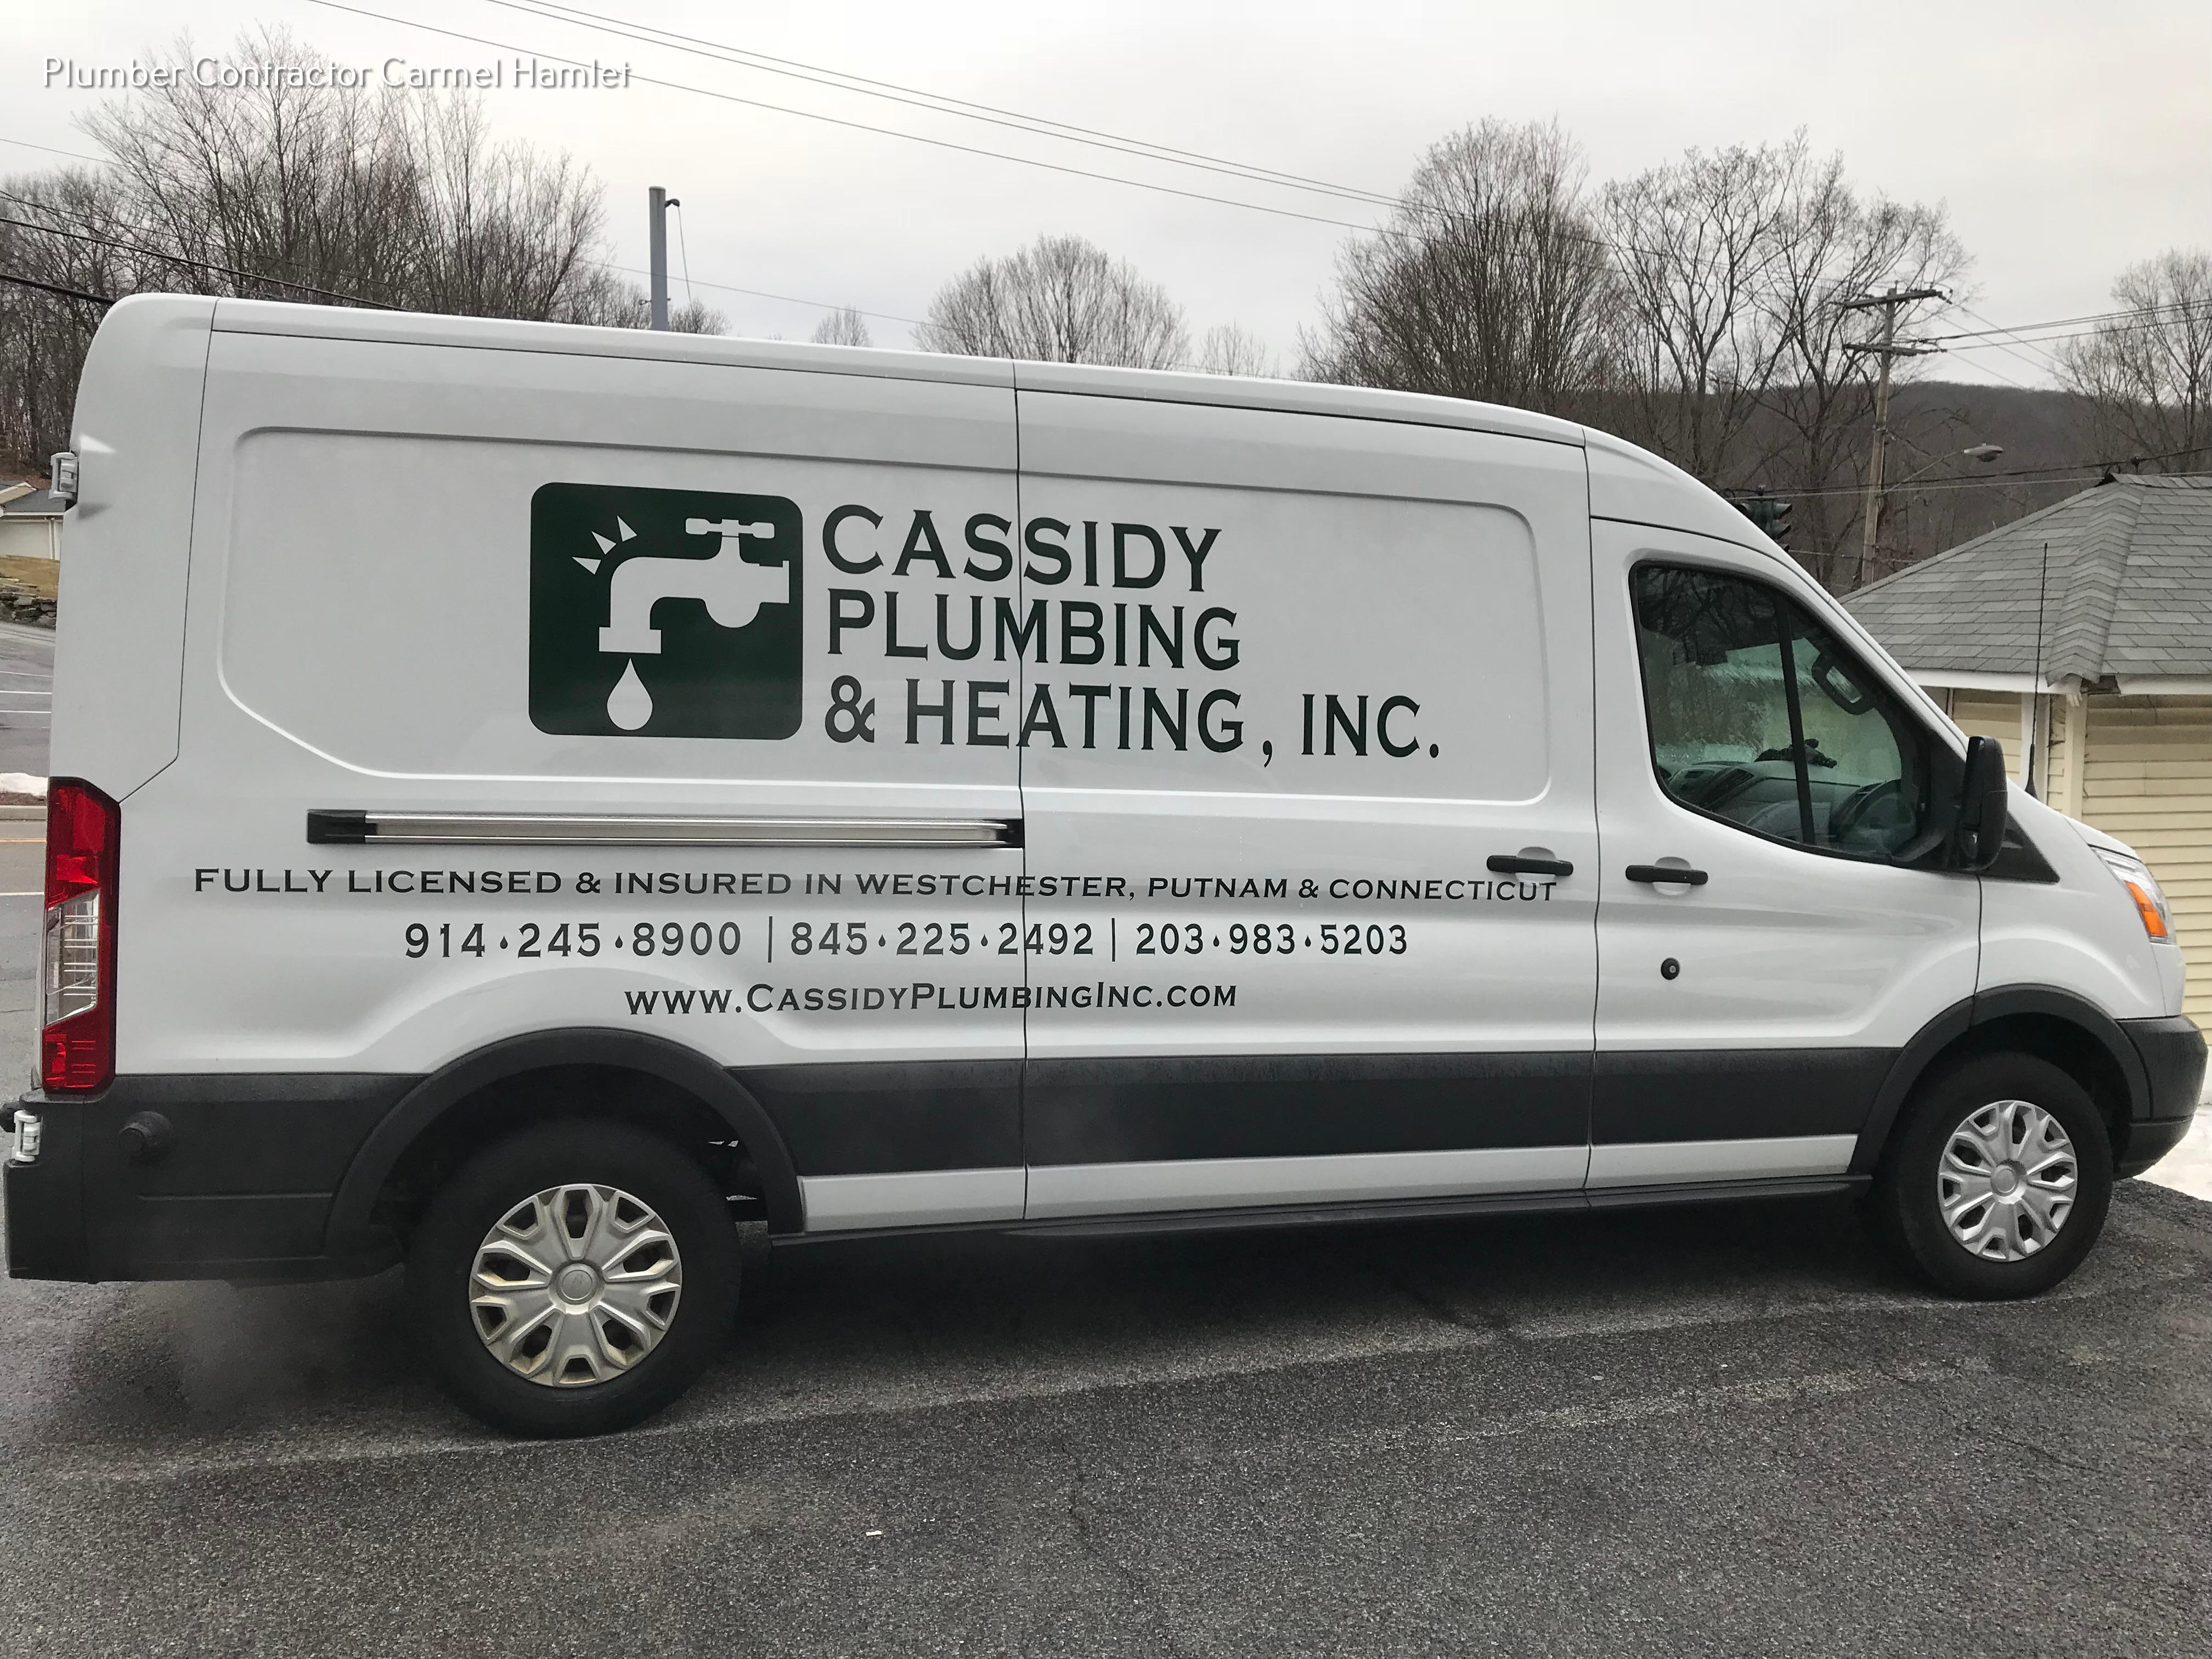 Cassidy Plumbing Inc Offer Expert Plumbing and Water Heater Solutions in Carmel Hamlet, NY